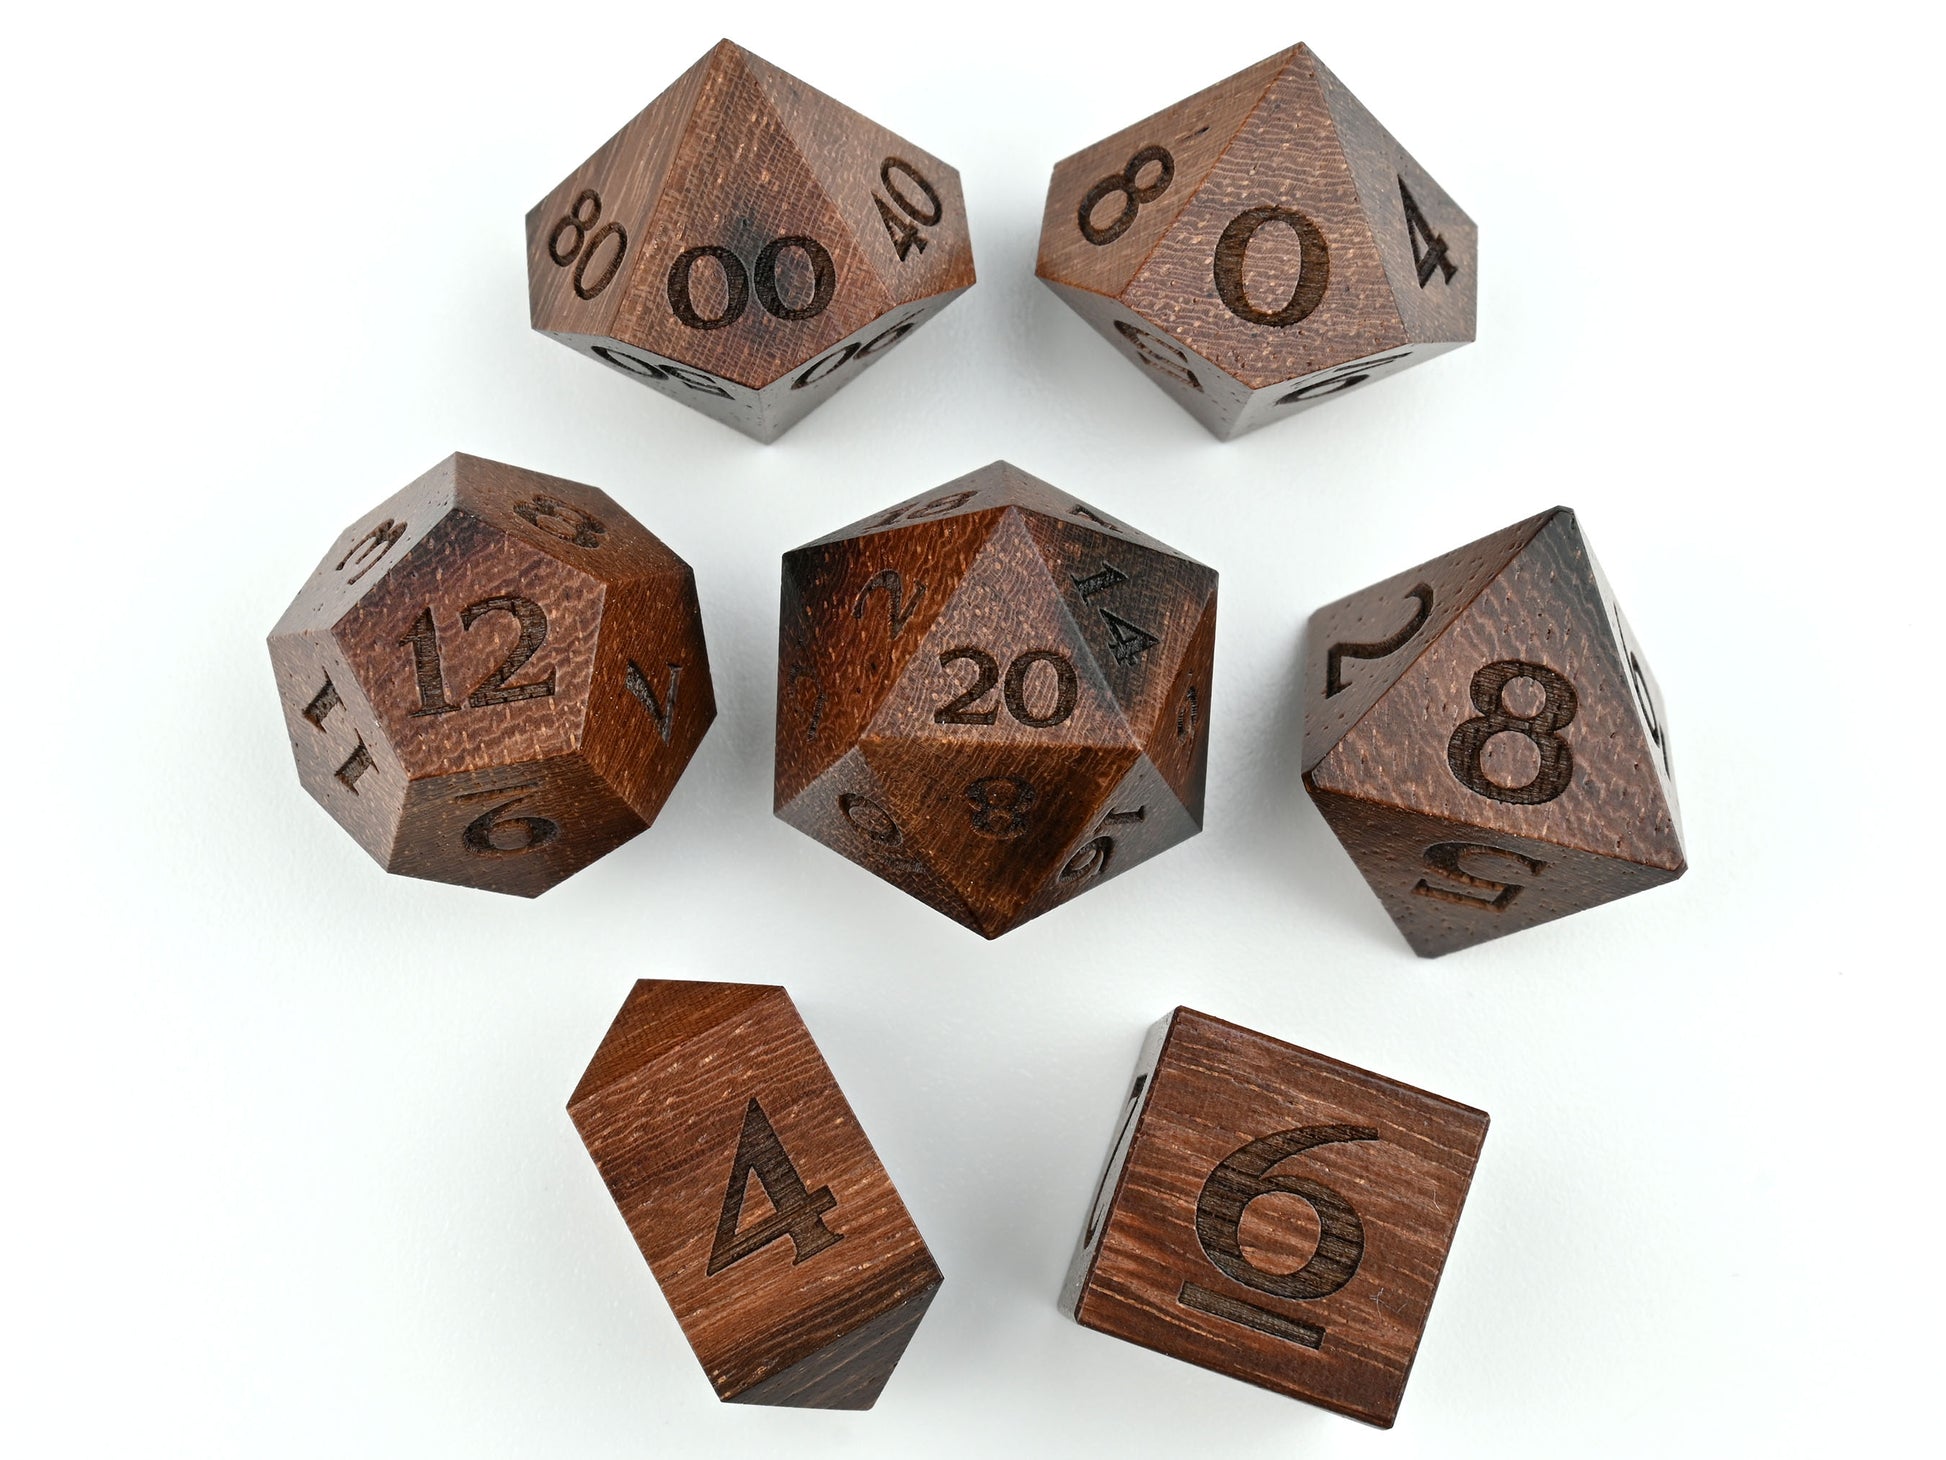 Katalox wood dice set for dungeons and dragons rpg D&D dnd